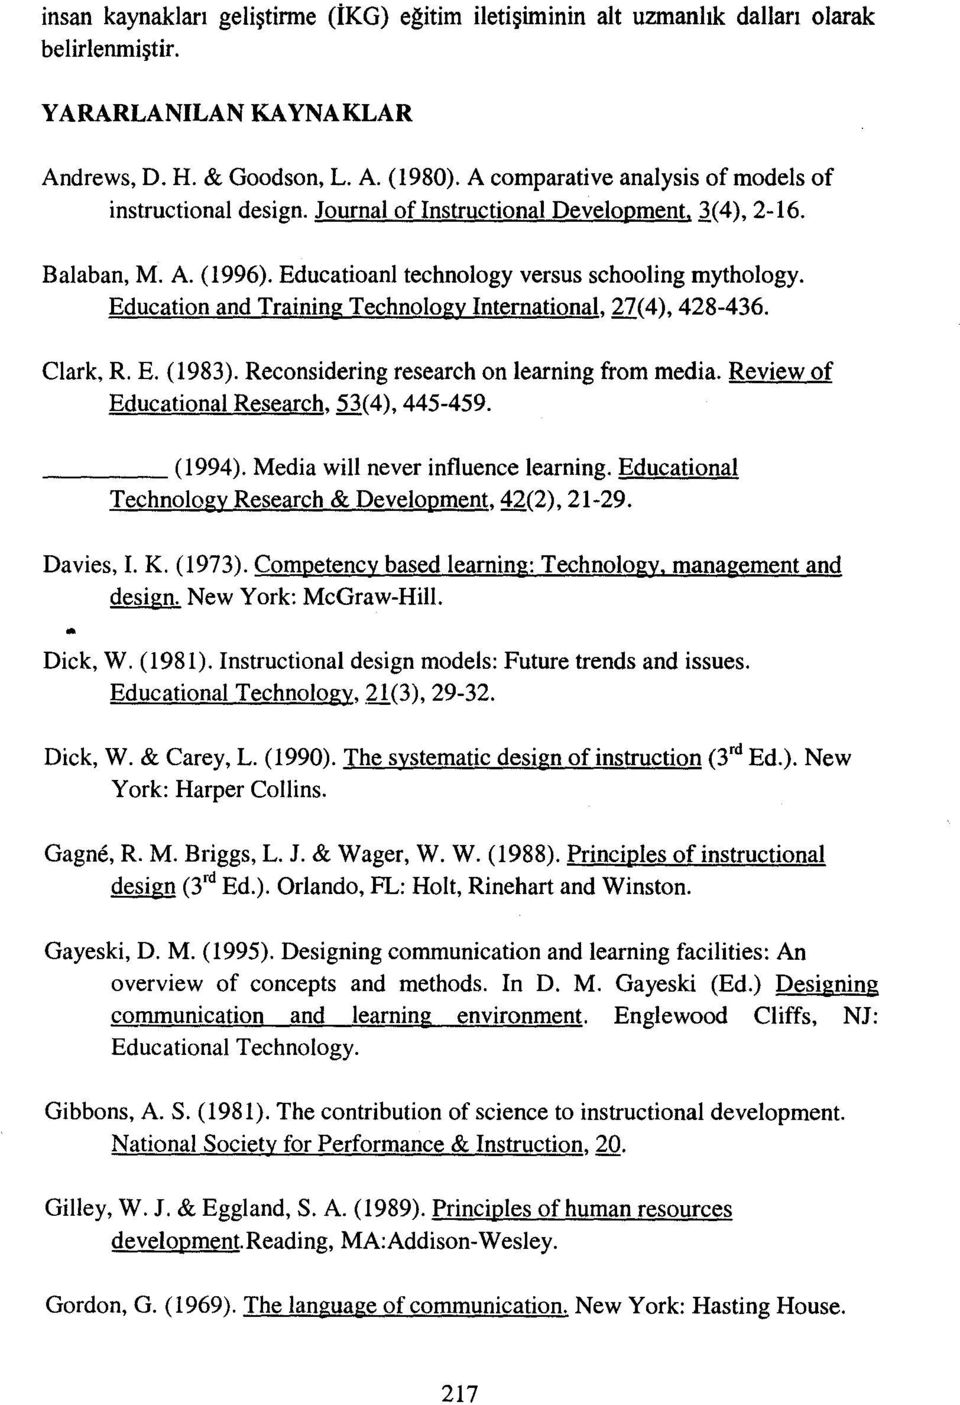 Education and Training Technology International, 27(4), 428-436. Clark, R. E. (1983). Reconsidering research on learning from media. Review of Educational Research, 53(4), 445-459. (1994).